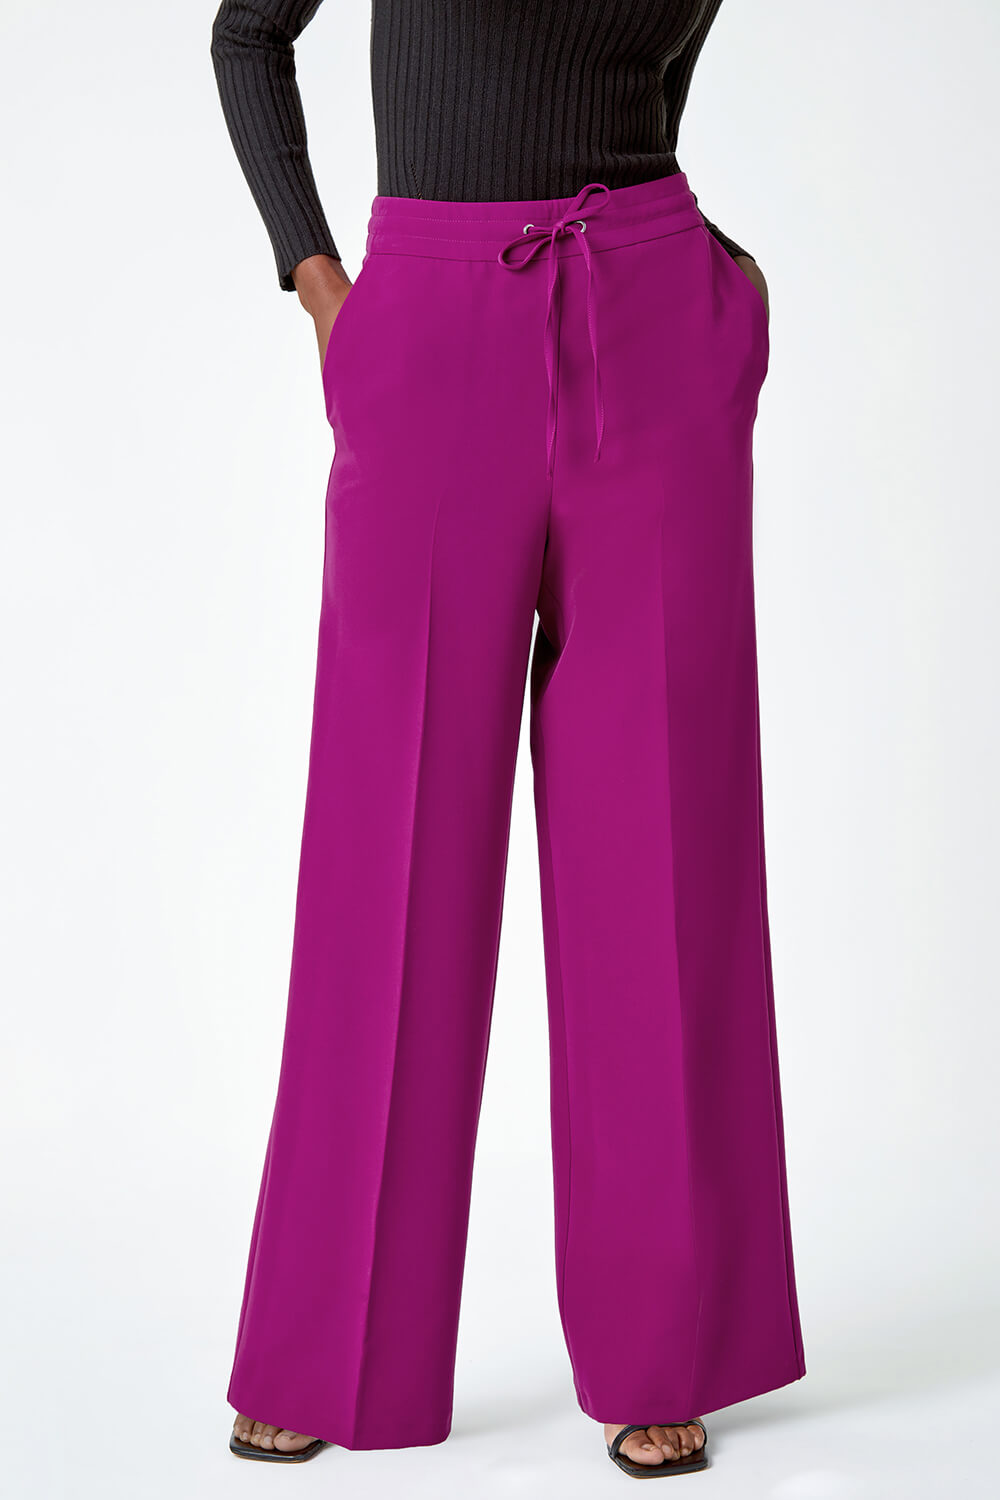 MAGENTA Wide Leg Tie Front Stretch Trouser, Image 6 of 7